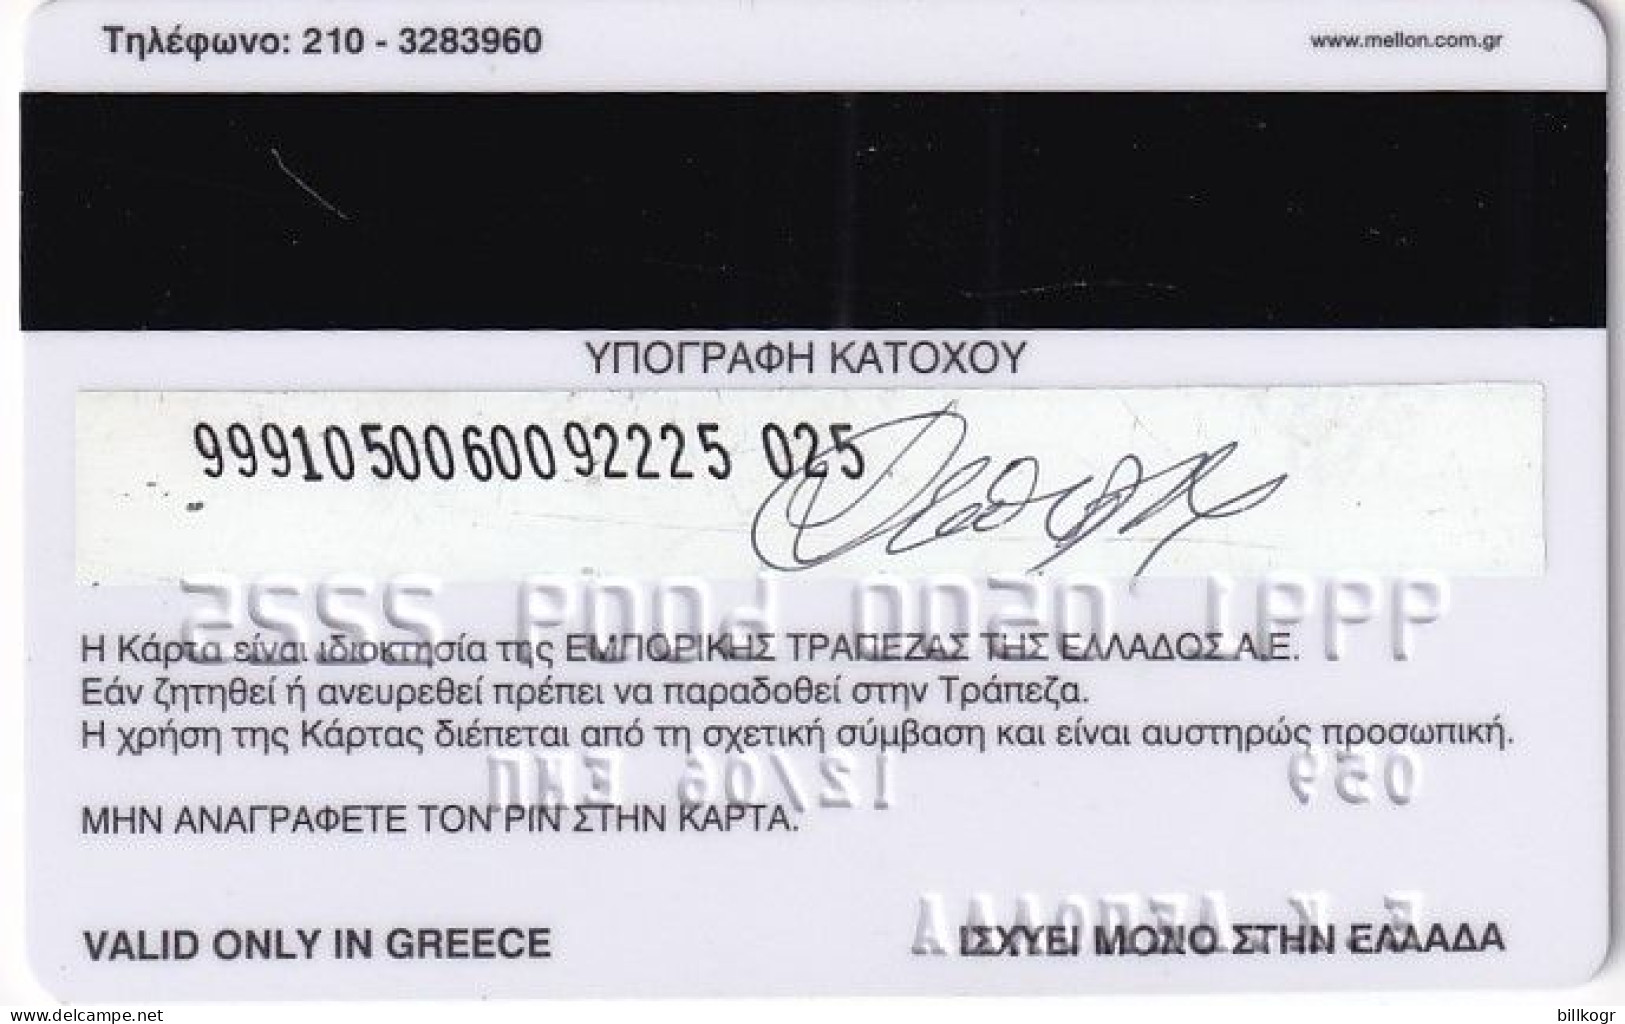 GREECE - Commercial Bank Credit Card, Used - Credit Cards (Exp. Date Min. 10 Years)